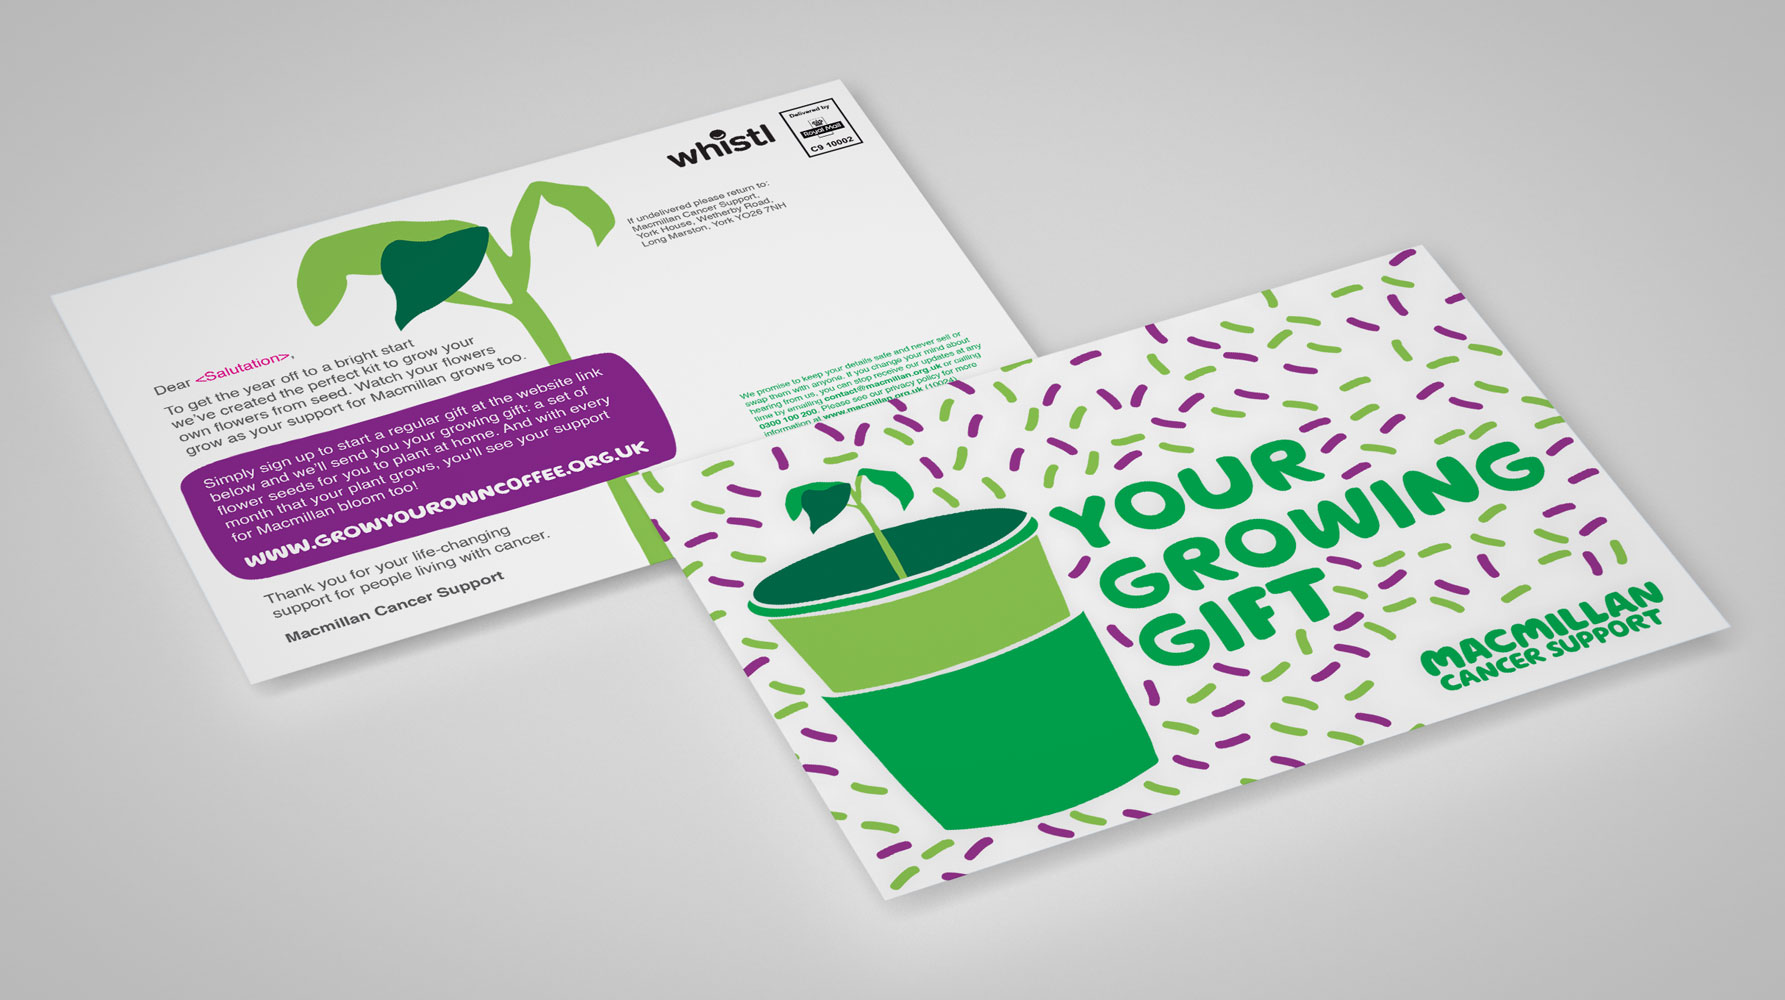 ave design studio london graphic design and website design and development for charities and not-for-profit organisations Macmillan Grow Your Own